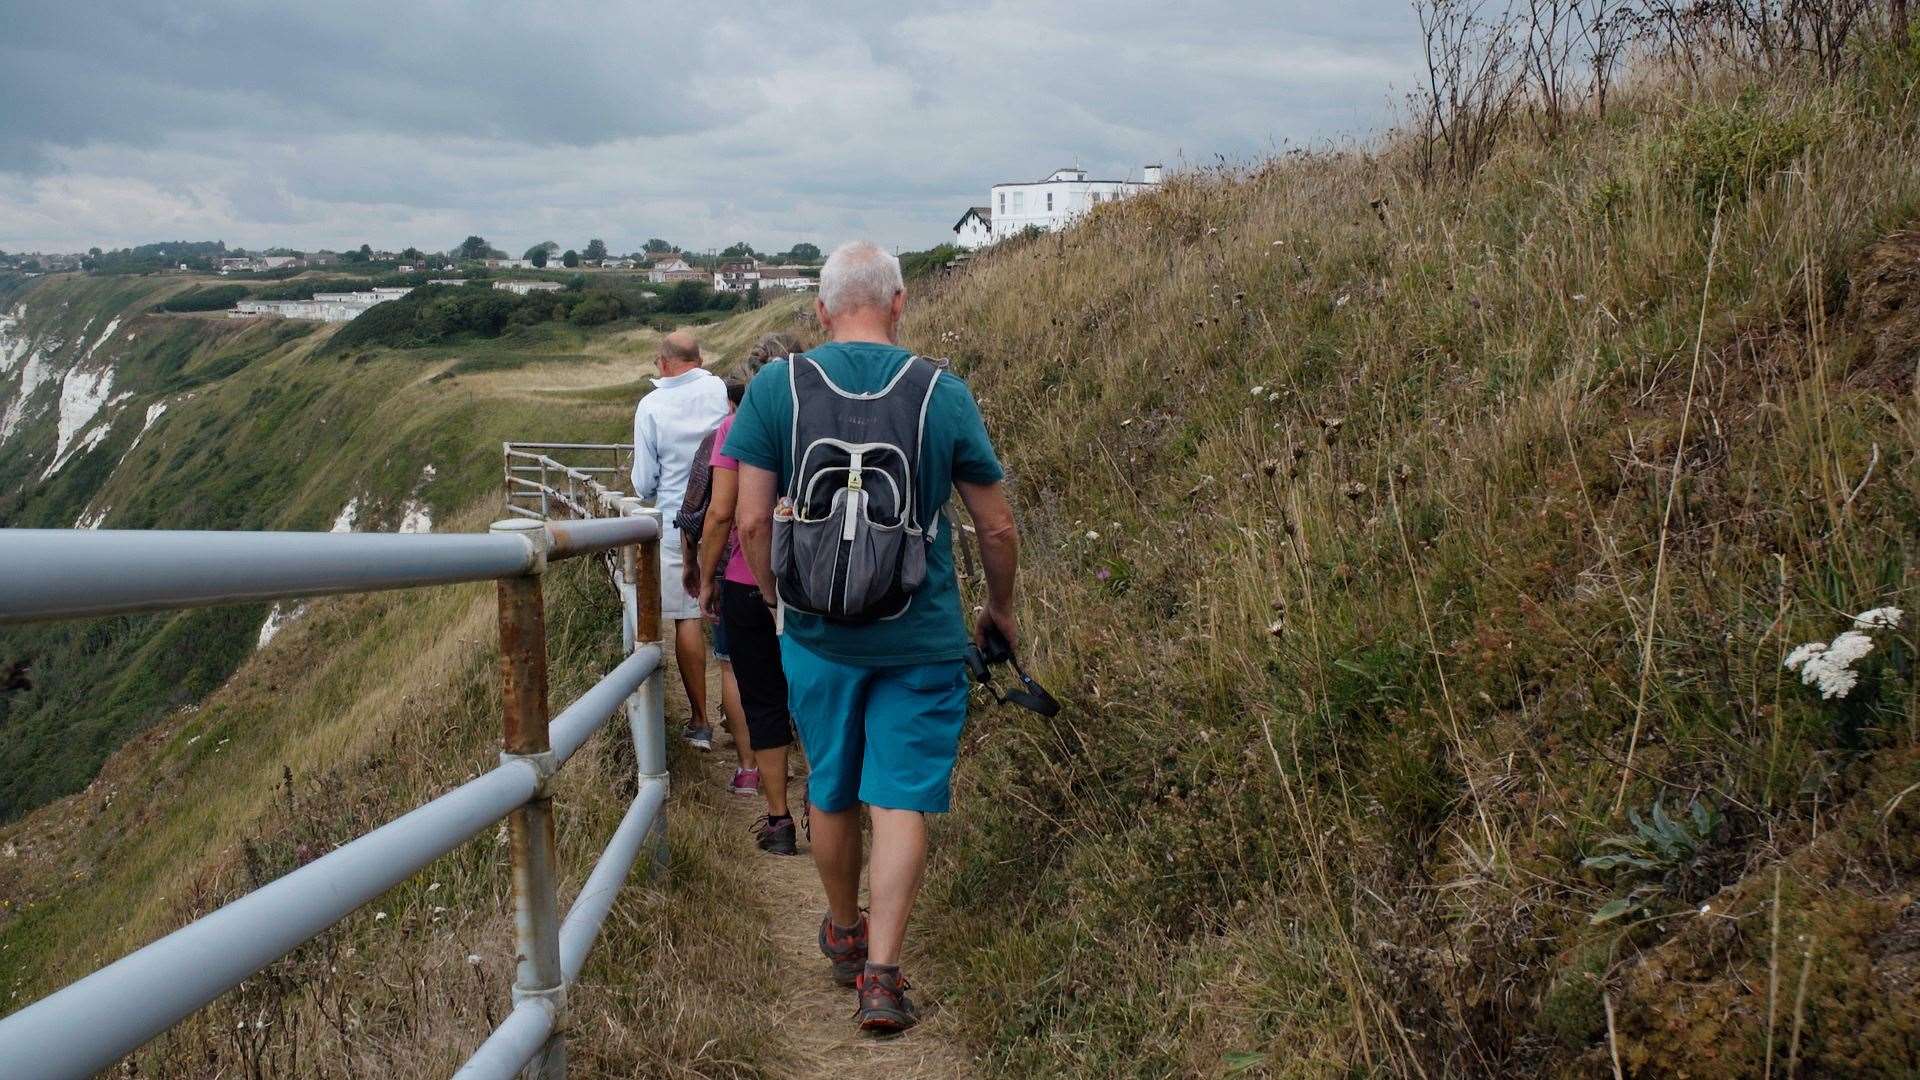 It is hoped if the bid is successful it will heighten the area's profile for eco-friendly tourism. Picture: Move Media/Kent AONB